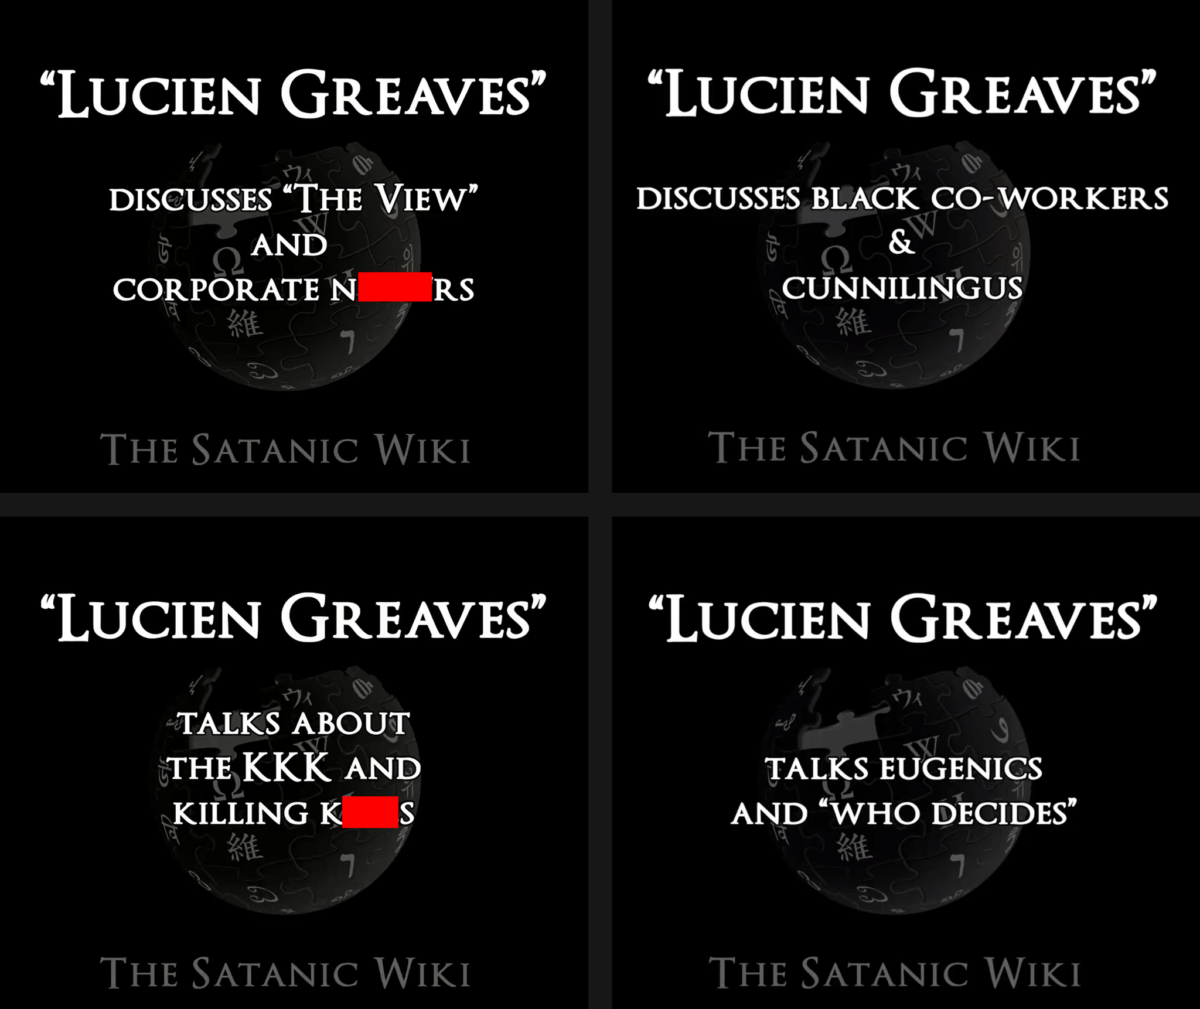 For video title screens edited into a square: Lucien Greaves discusses "The View" and Corporate N-words (partially censored); Lucien Greaves discusses Black co-workers and cunnilingus; Lucien Greaves talks about the KKK and killing [k-slur for Jews, partially censored]; Lucien Greaves talks eugenics and "who decides"